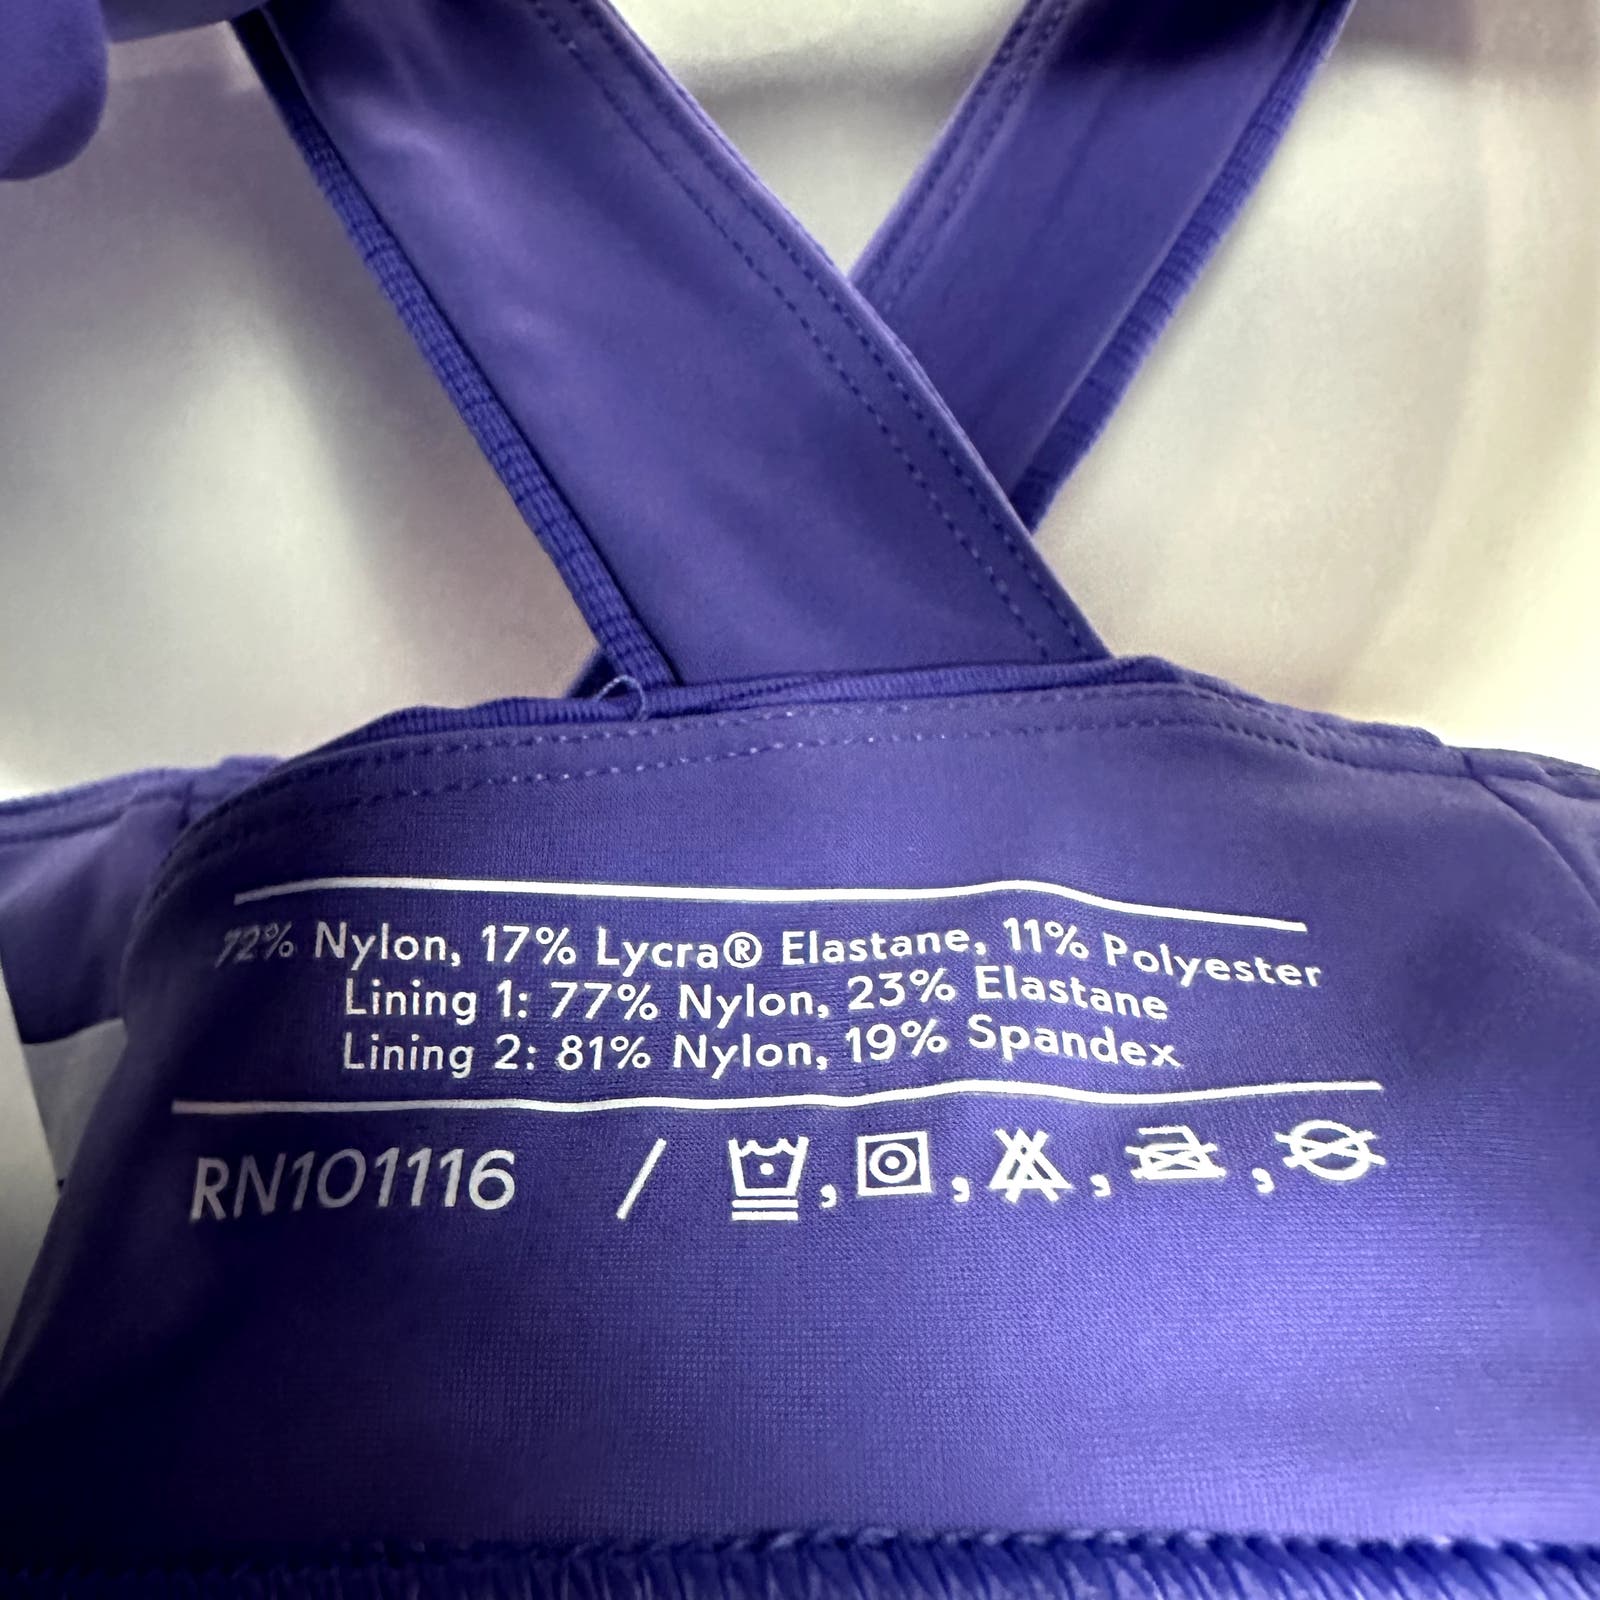 Outdoor Voices NWT Thrive Bra Violet Size Small